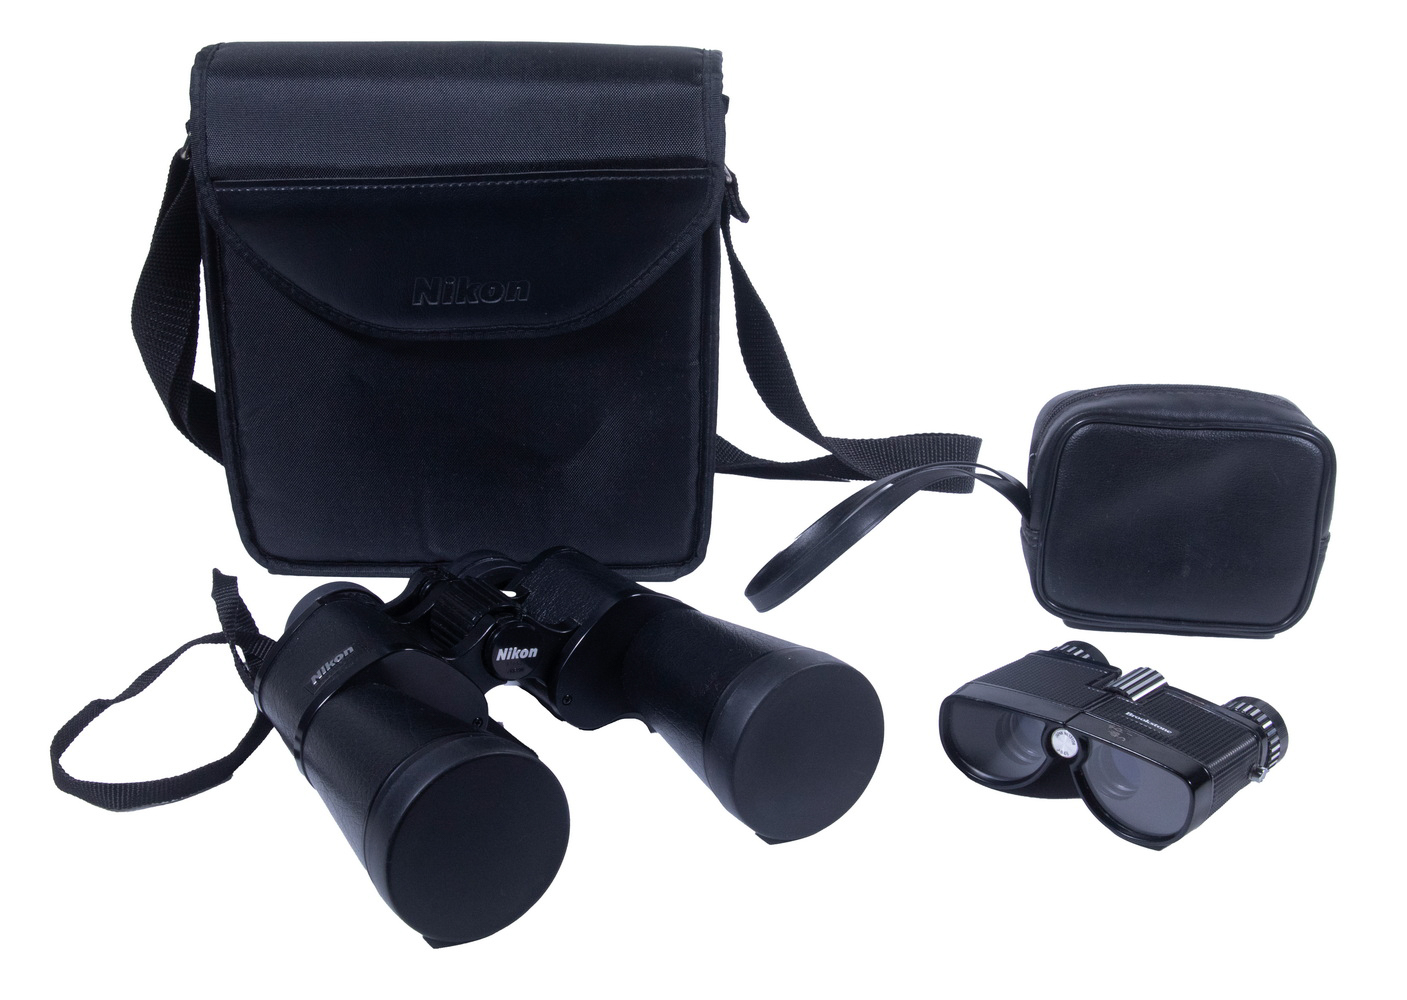  2 PRS BINOCULARS WITH CASES Including  302823